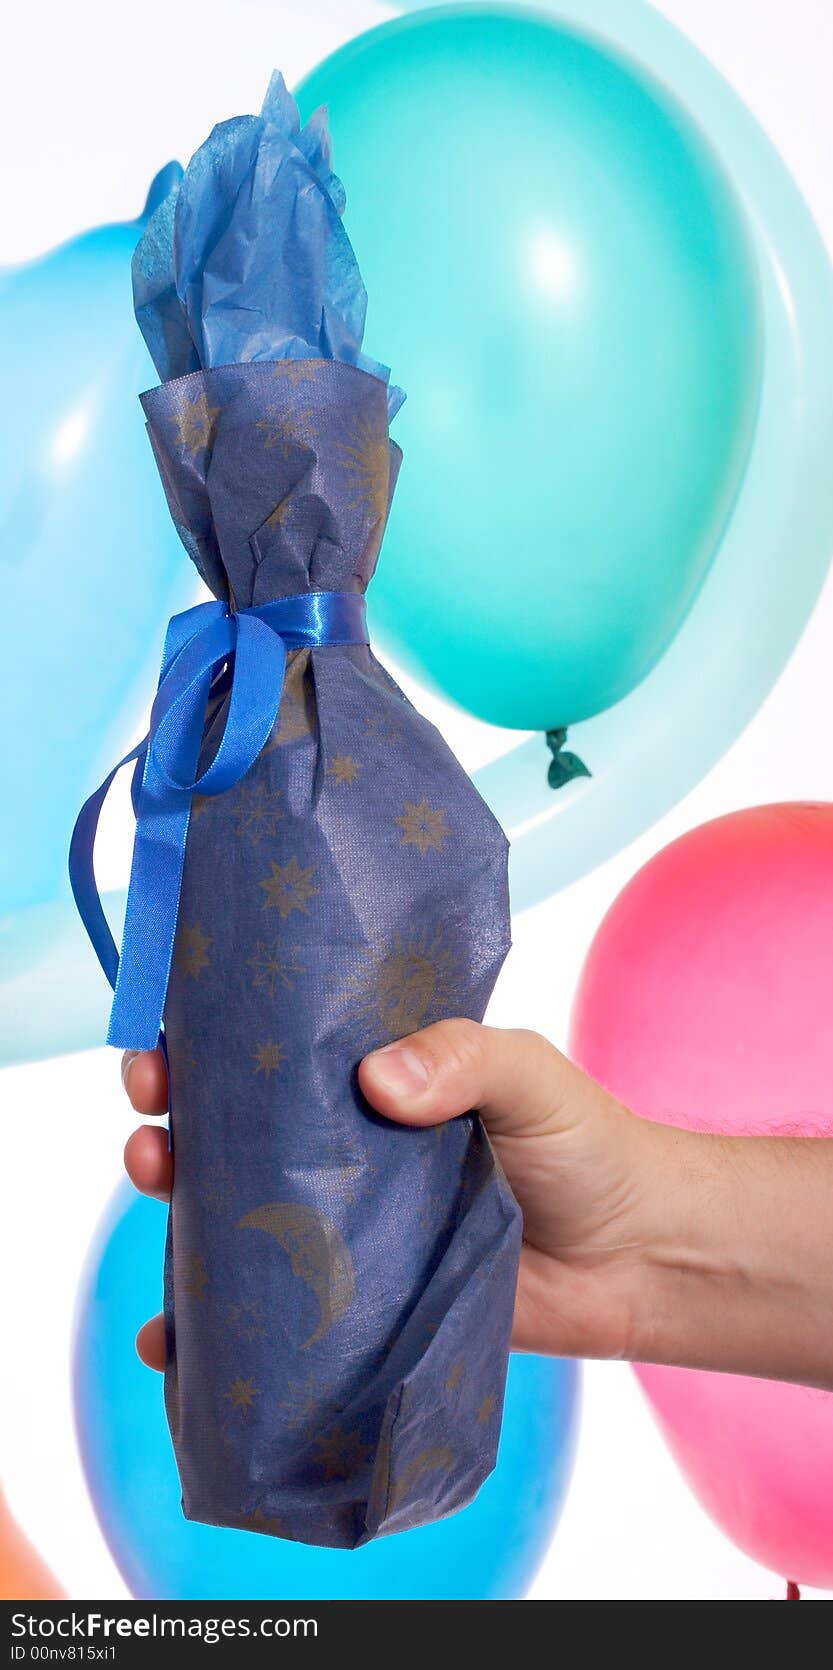 A hand holding wrap bottle over the balloons. A hand holding wrap bottle over the balloons